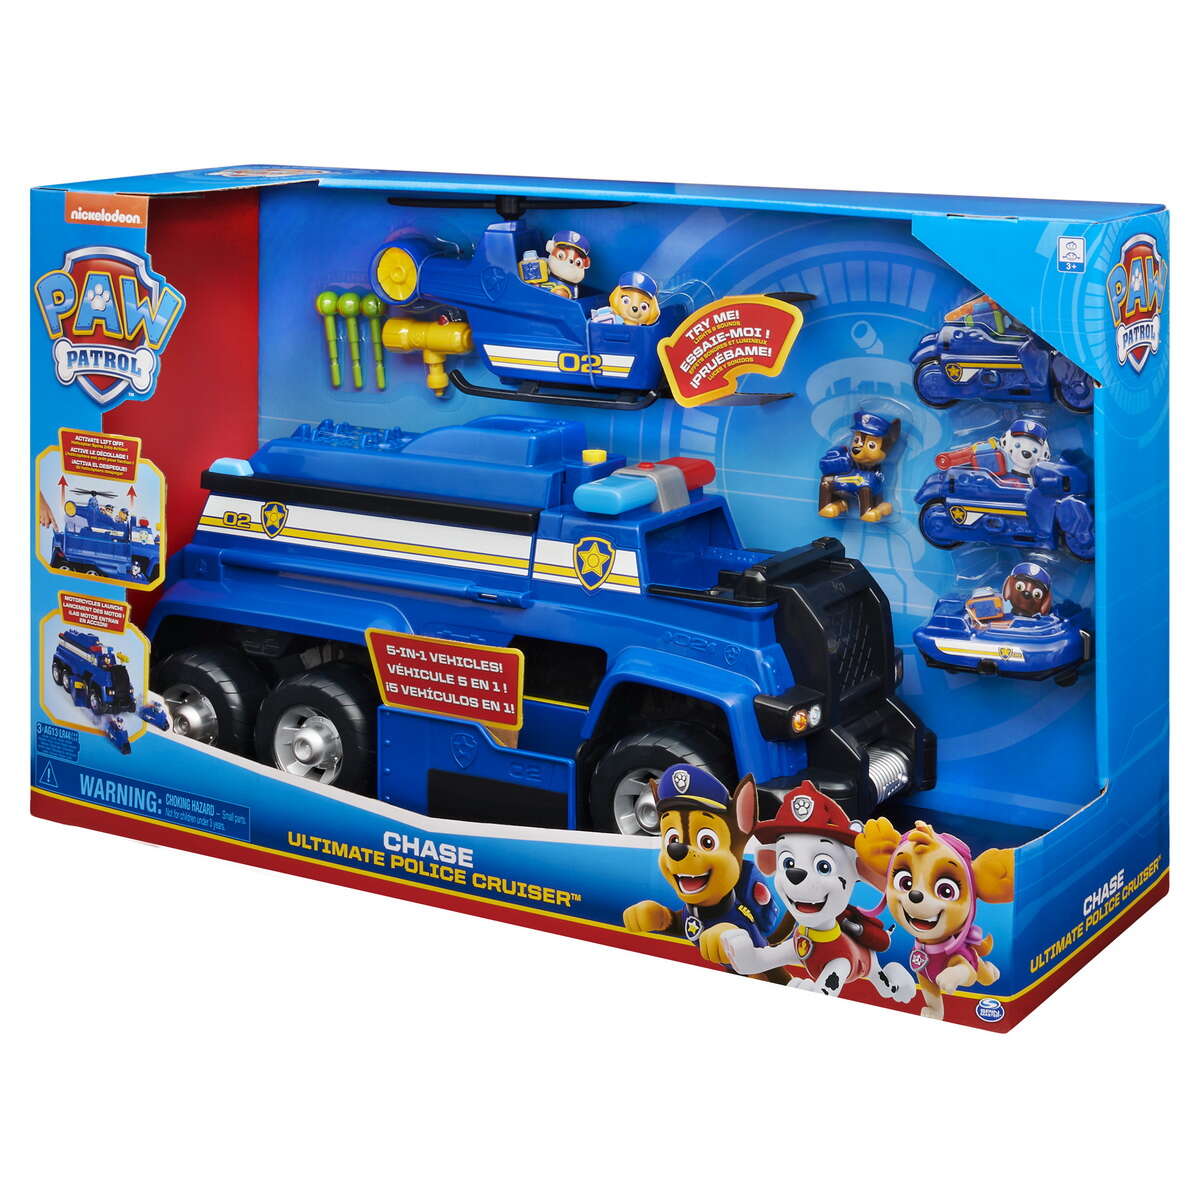 Patrula catelusilor chase ultimate police cruiser 5in1